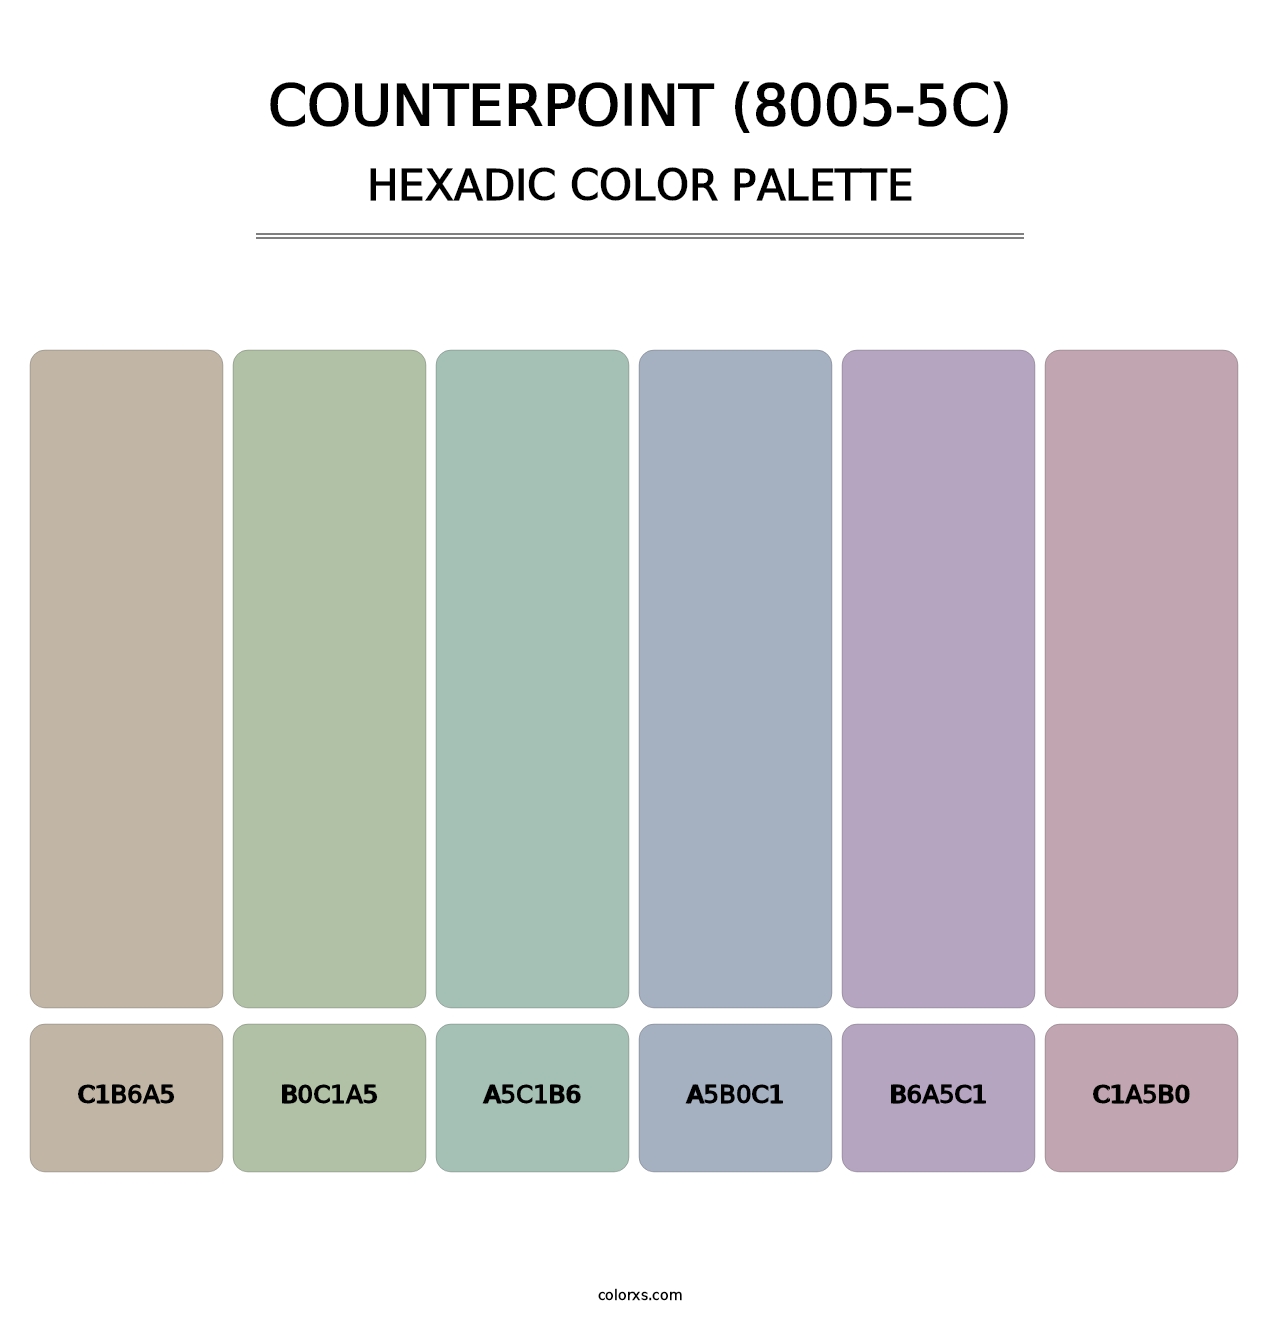 Counterpoint (8005-5C) - Hexadic Color Palette